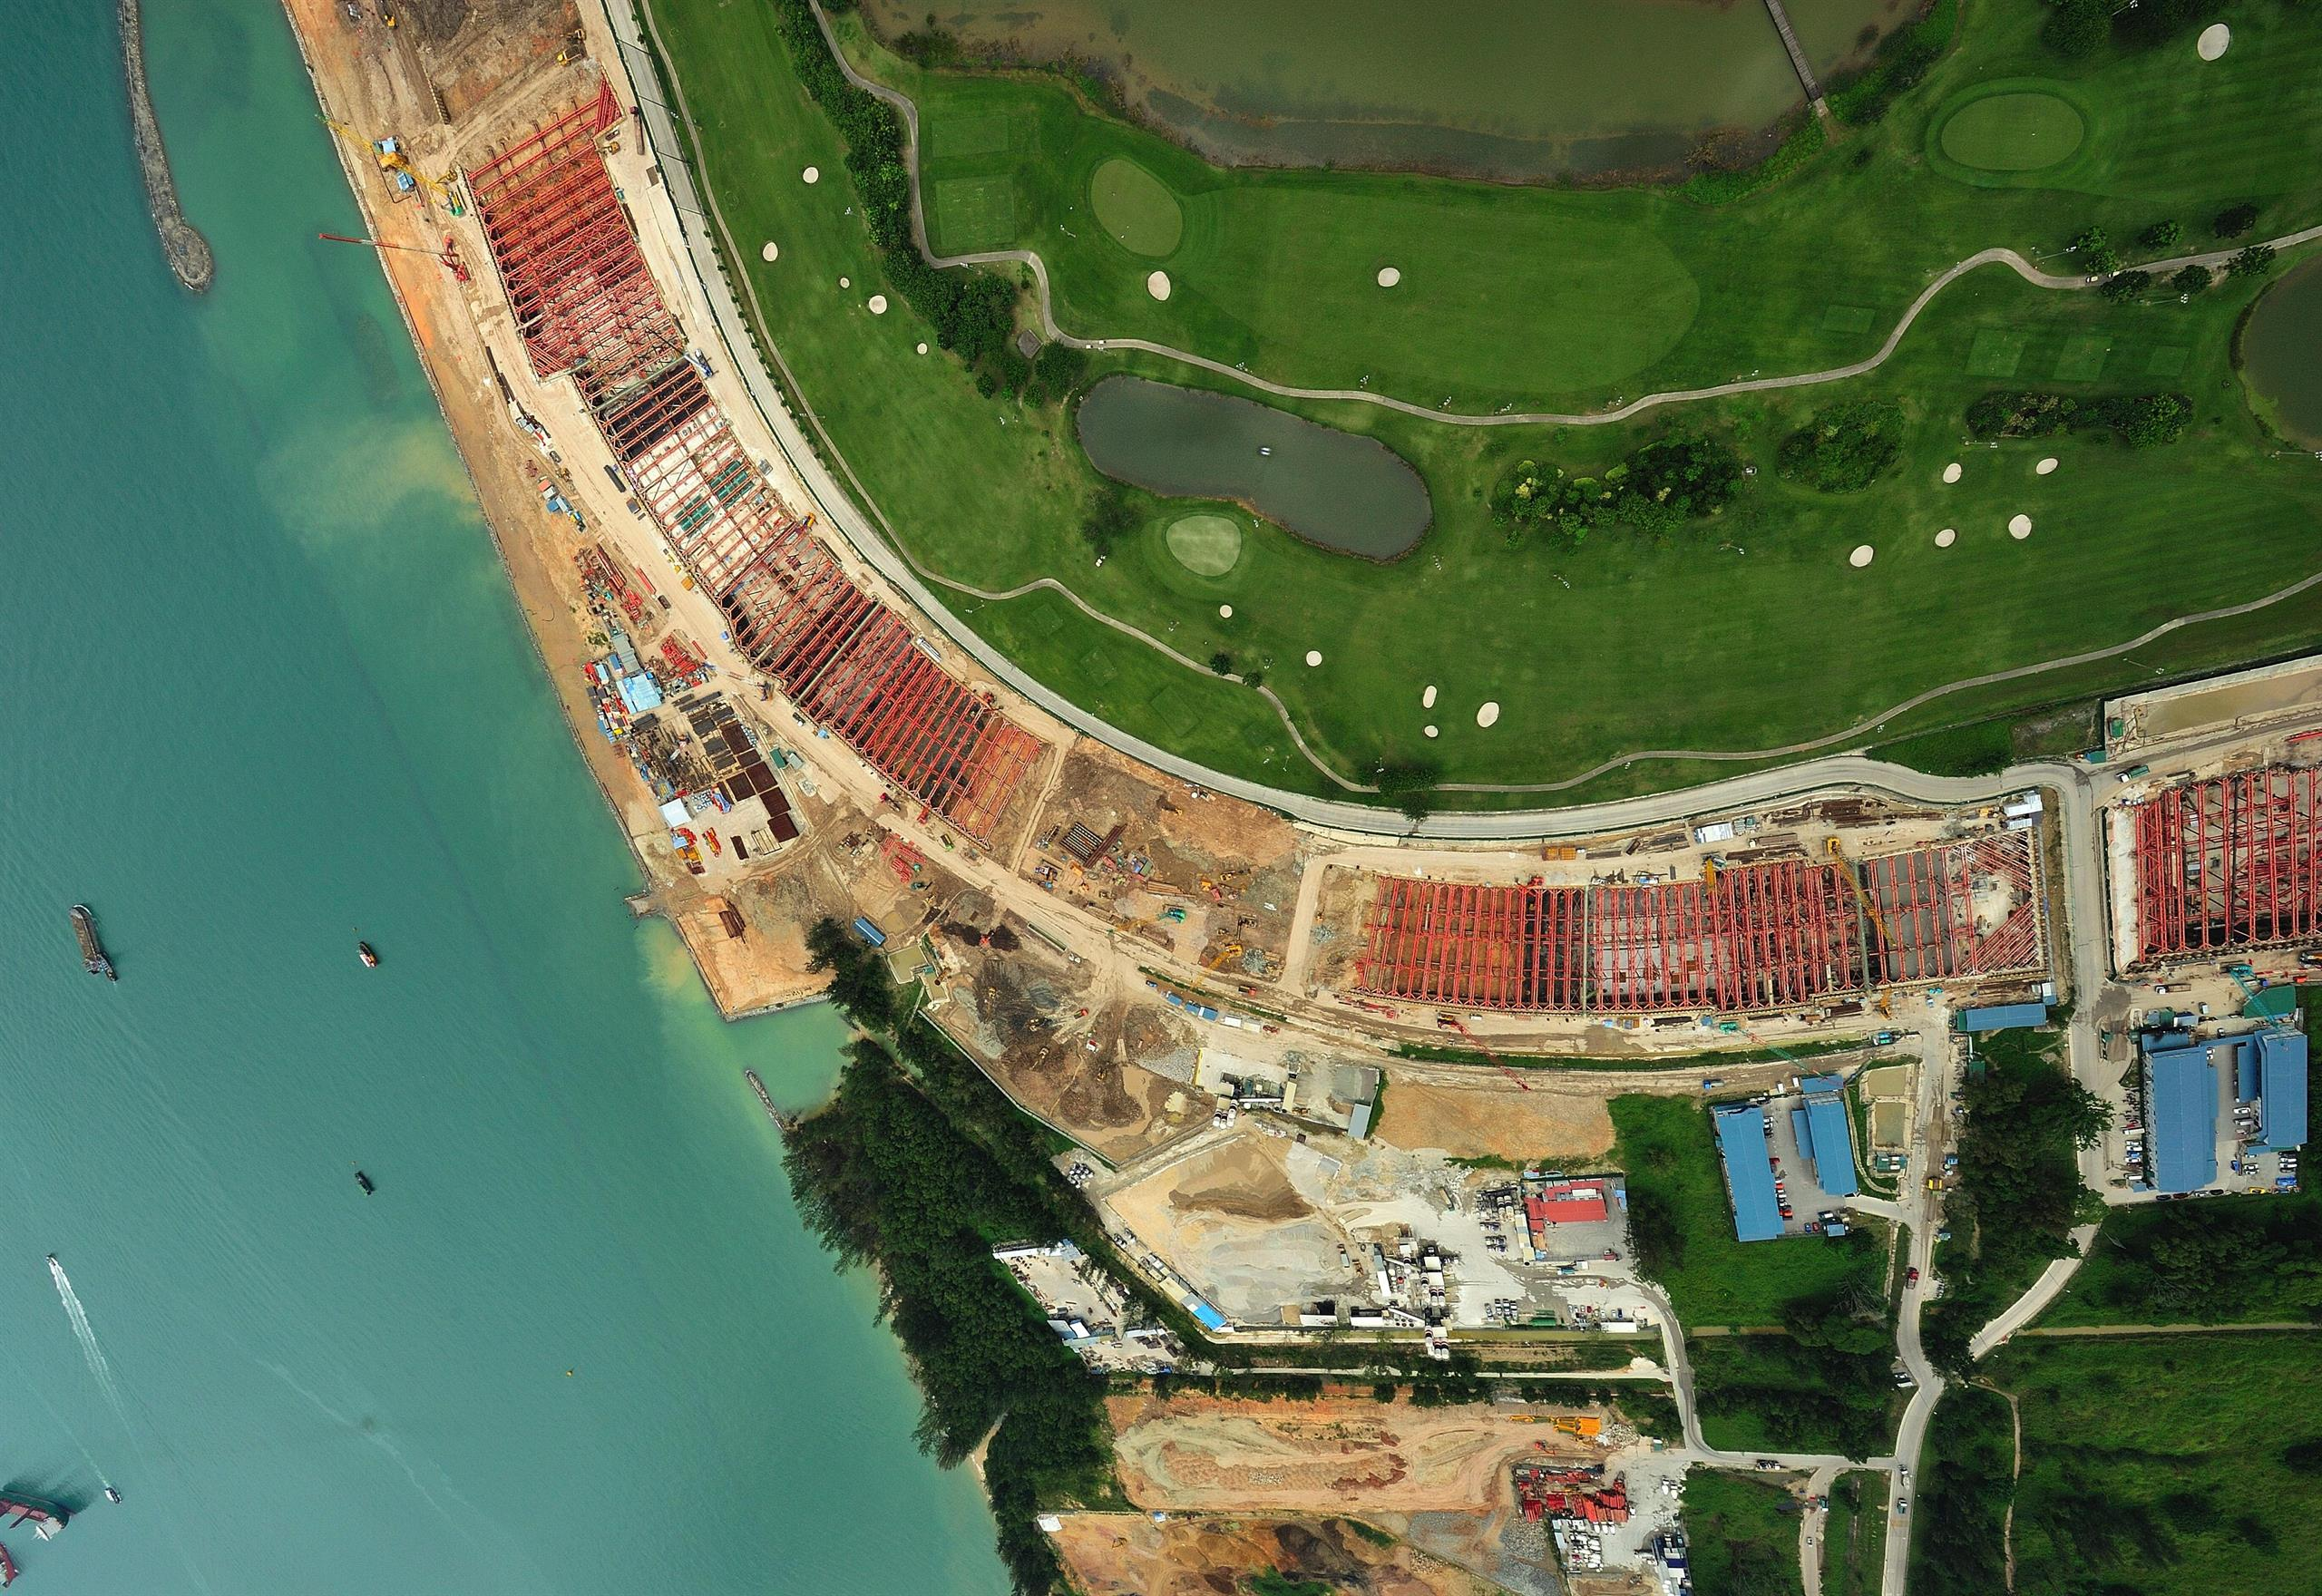 Our innovations on Singapore’s Marina Coastal Expressway have enabled faster, more efficient construction while meeting the state’s famously tough safety requirements. We worked closely with two contractors to review conventional construction methods and develop more efficient alternatives that have enabled nearly 3km of tunnel to be delivered safely, with cost and time savings.